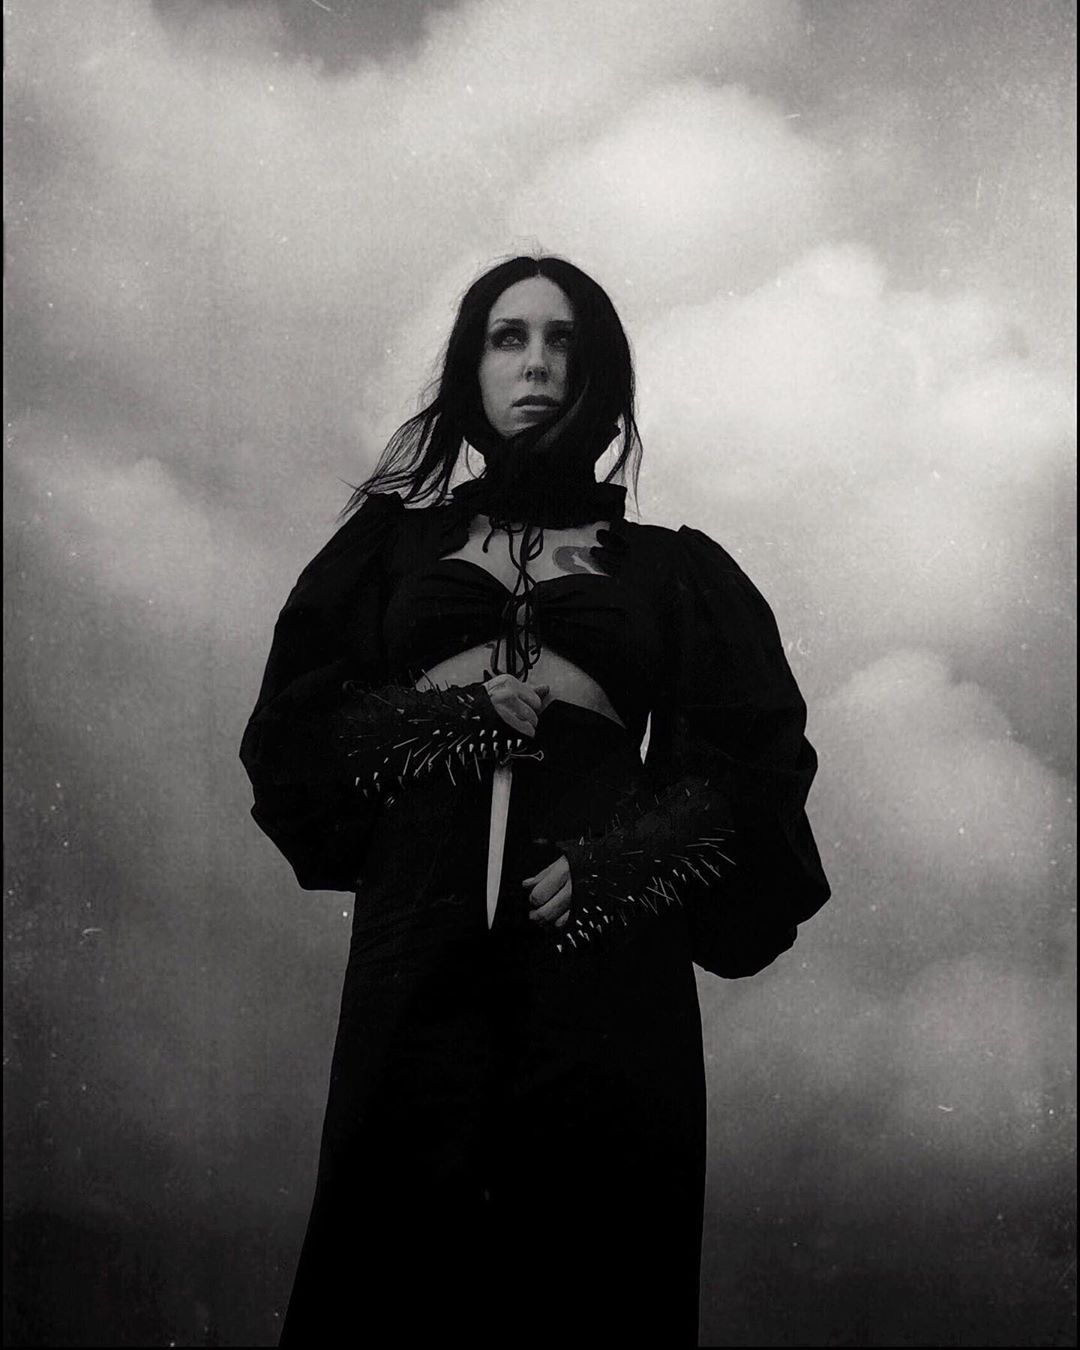 Chelsea Wolfe Blog — Chelsea Wolfe photo by @nonalimmenphotography